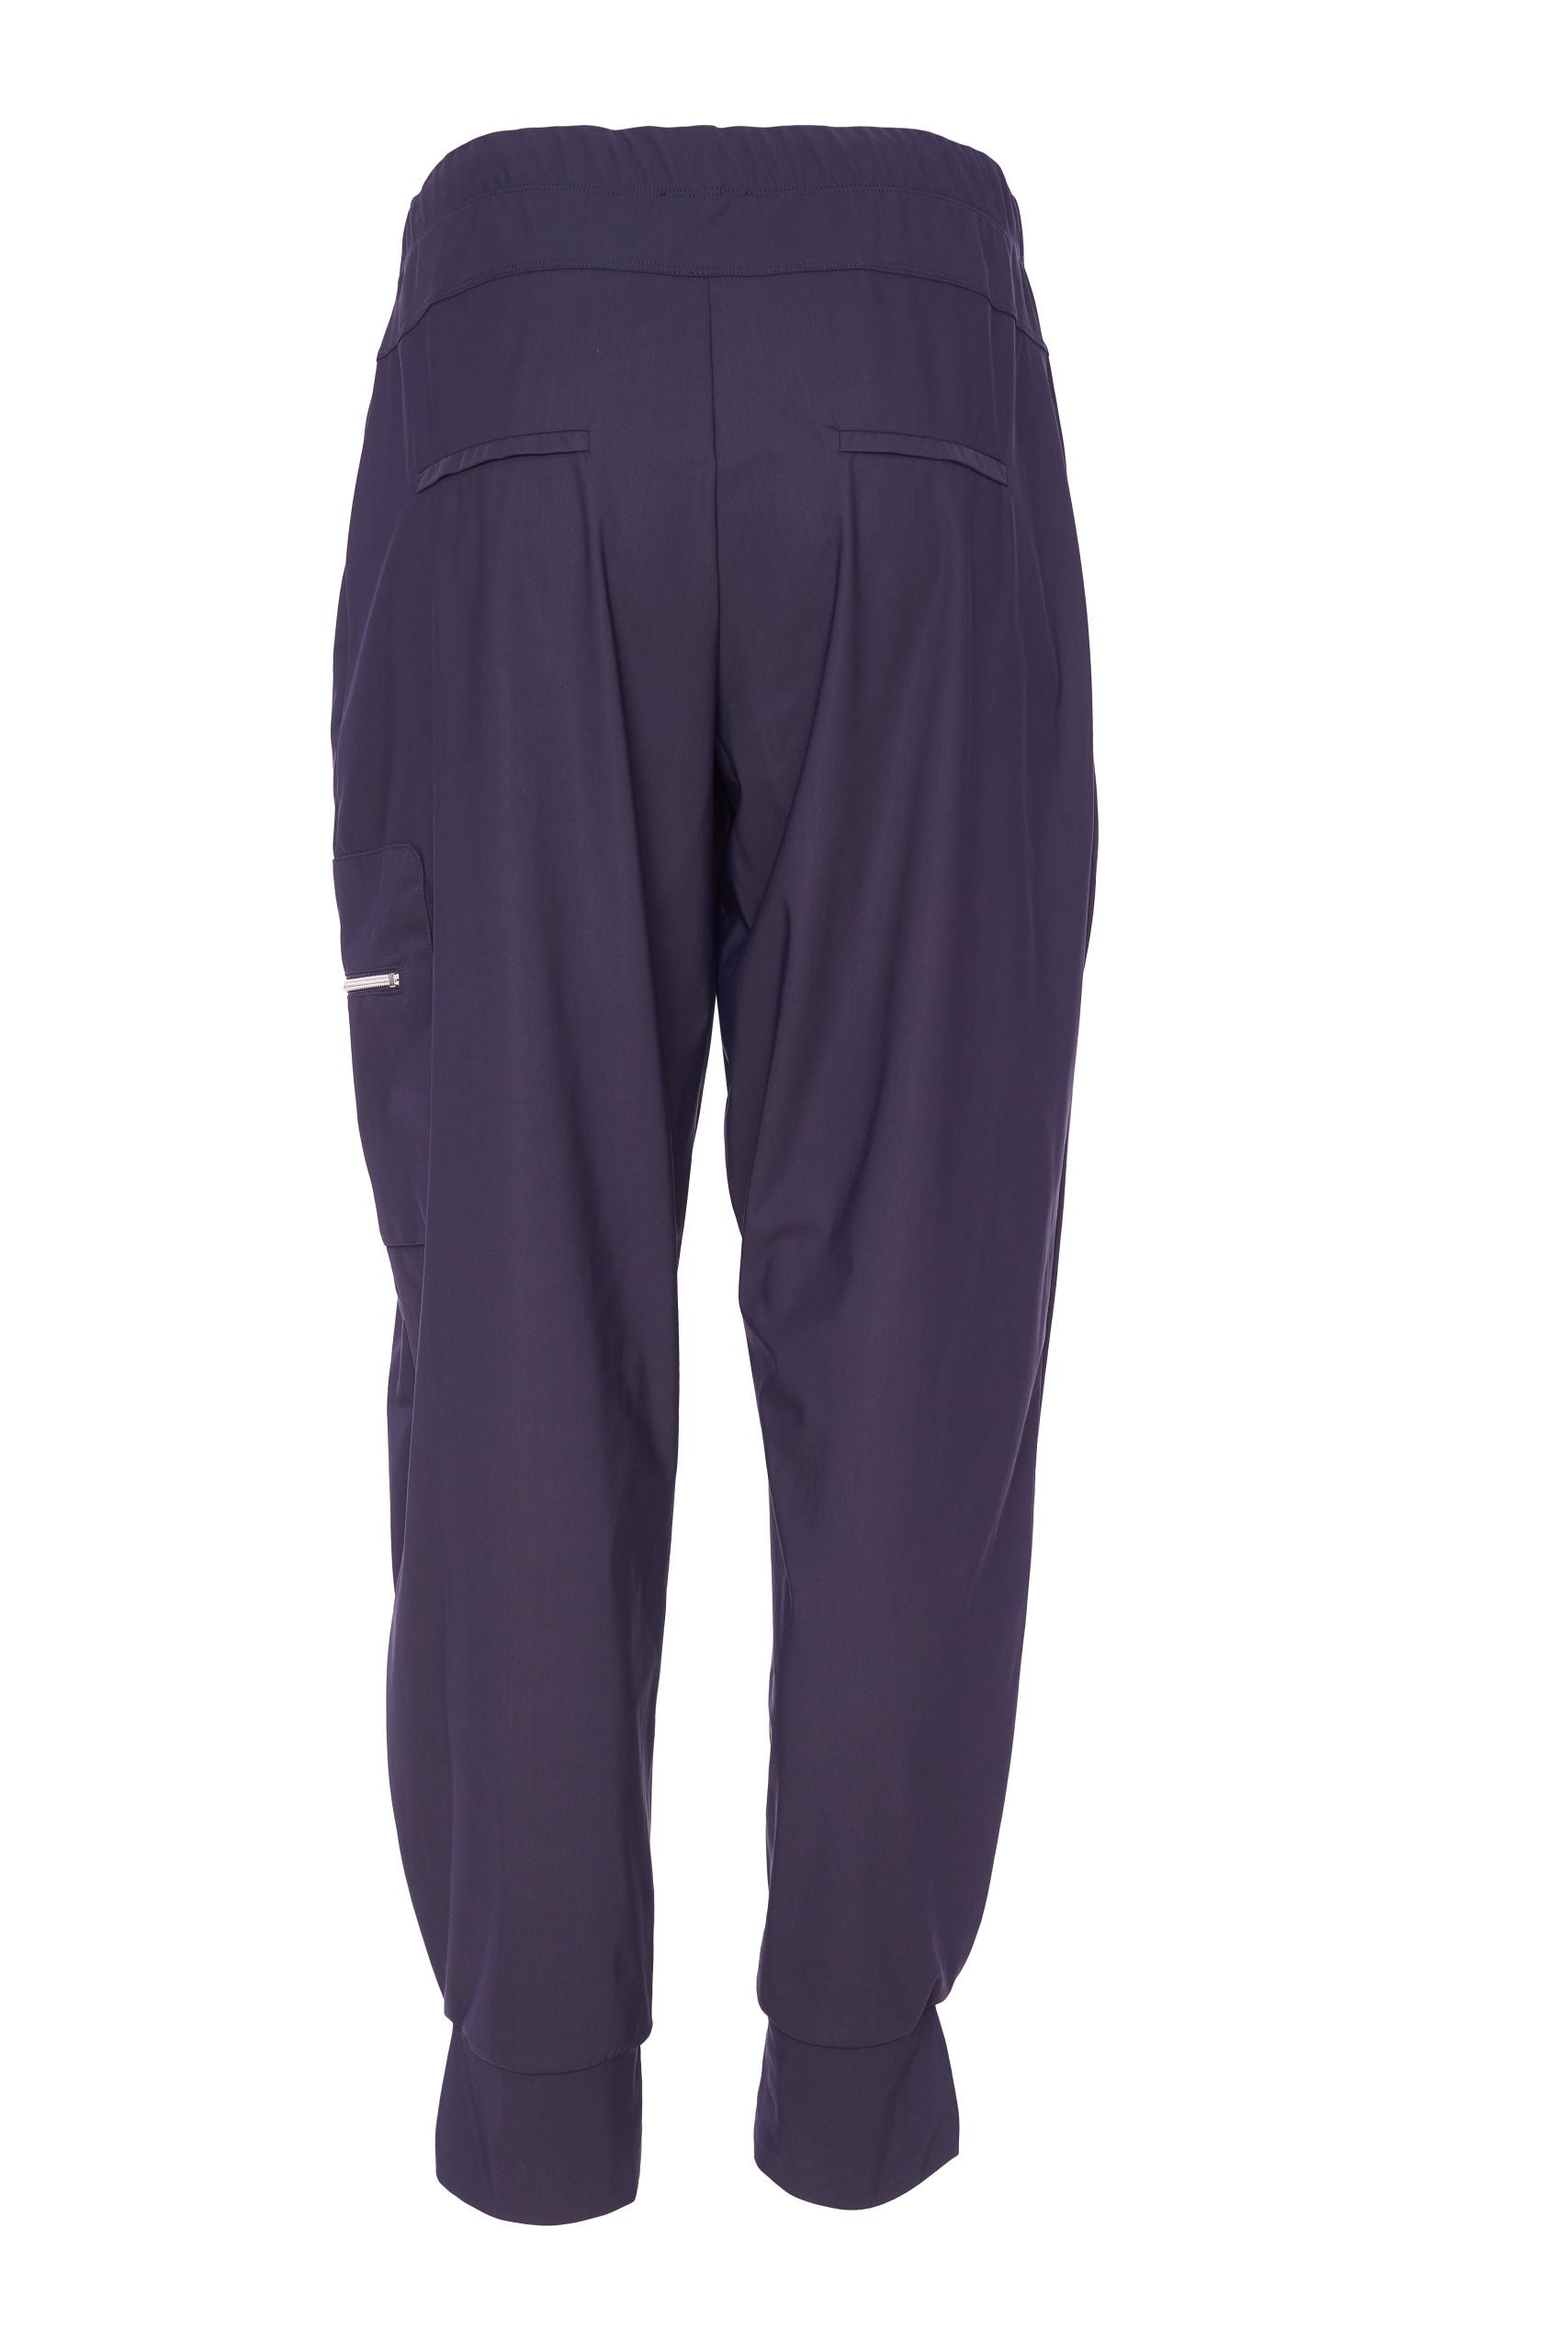 Cuff Trouser with Side Pocket/Zip in Mink (Image in Navy)